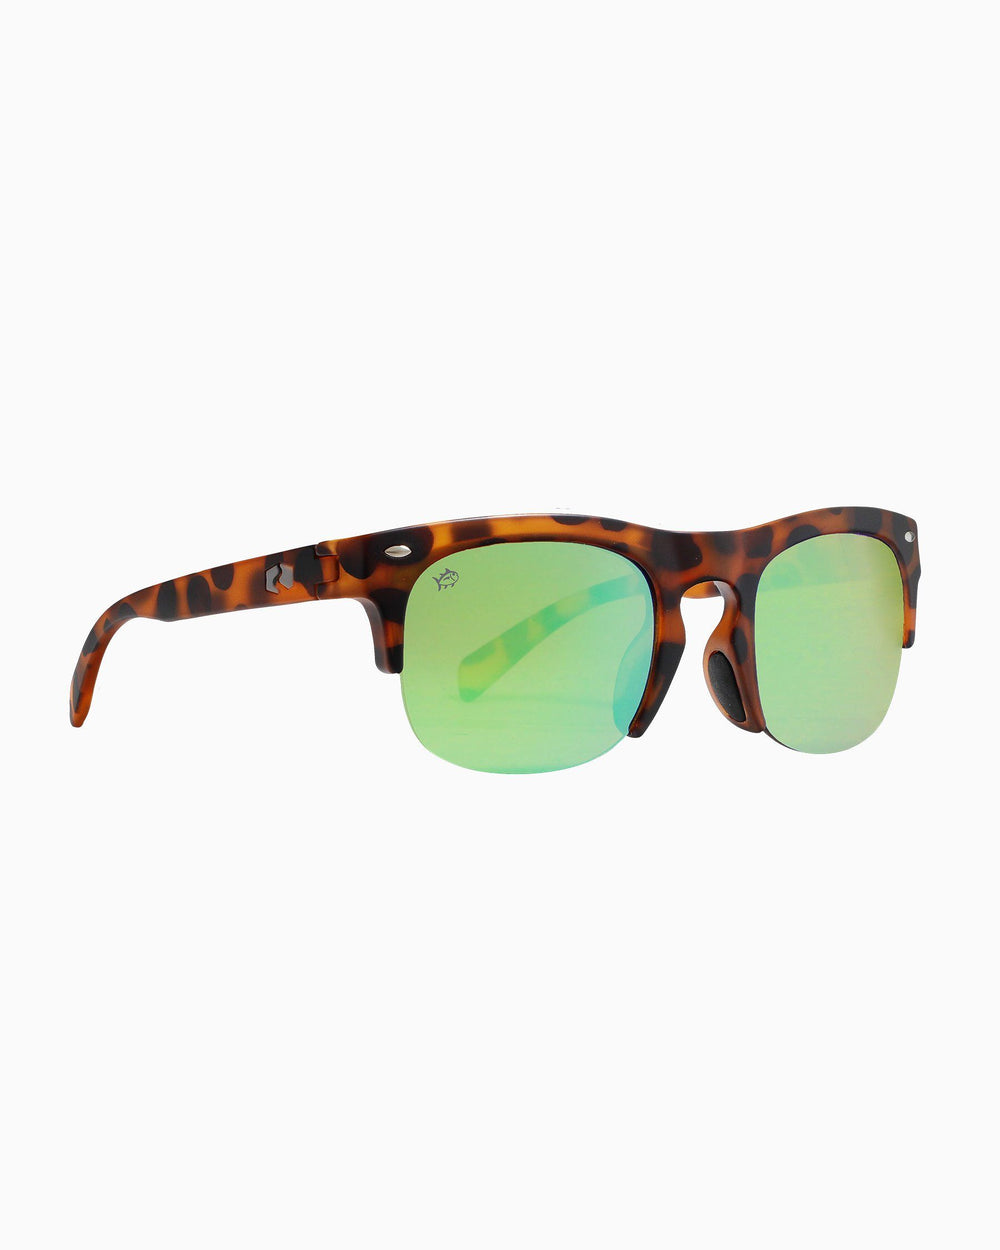 The side of the Men's Rheos Sullivans Sunglasses by Southern Tide - Tortoise Emerald